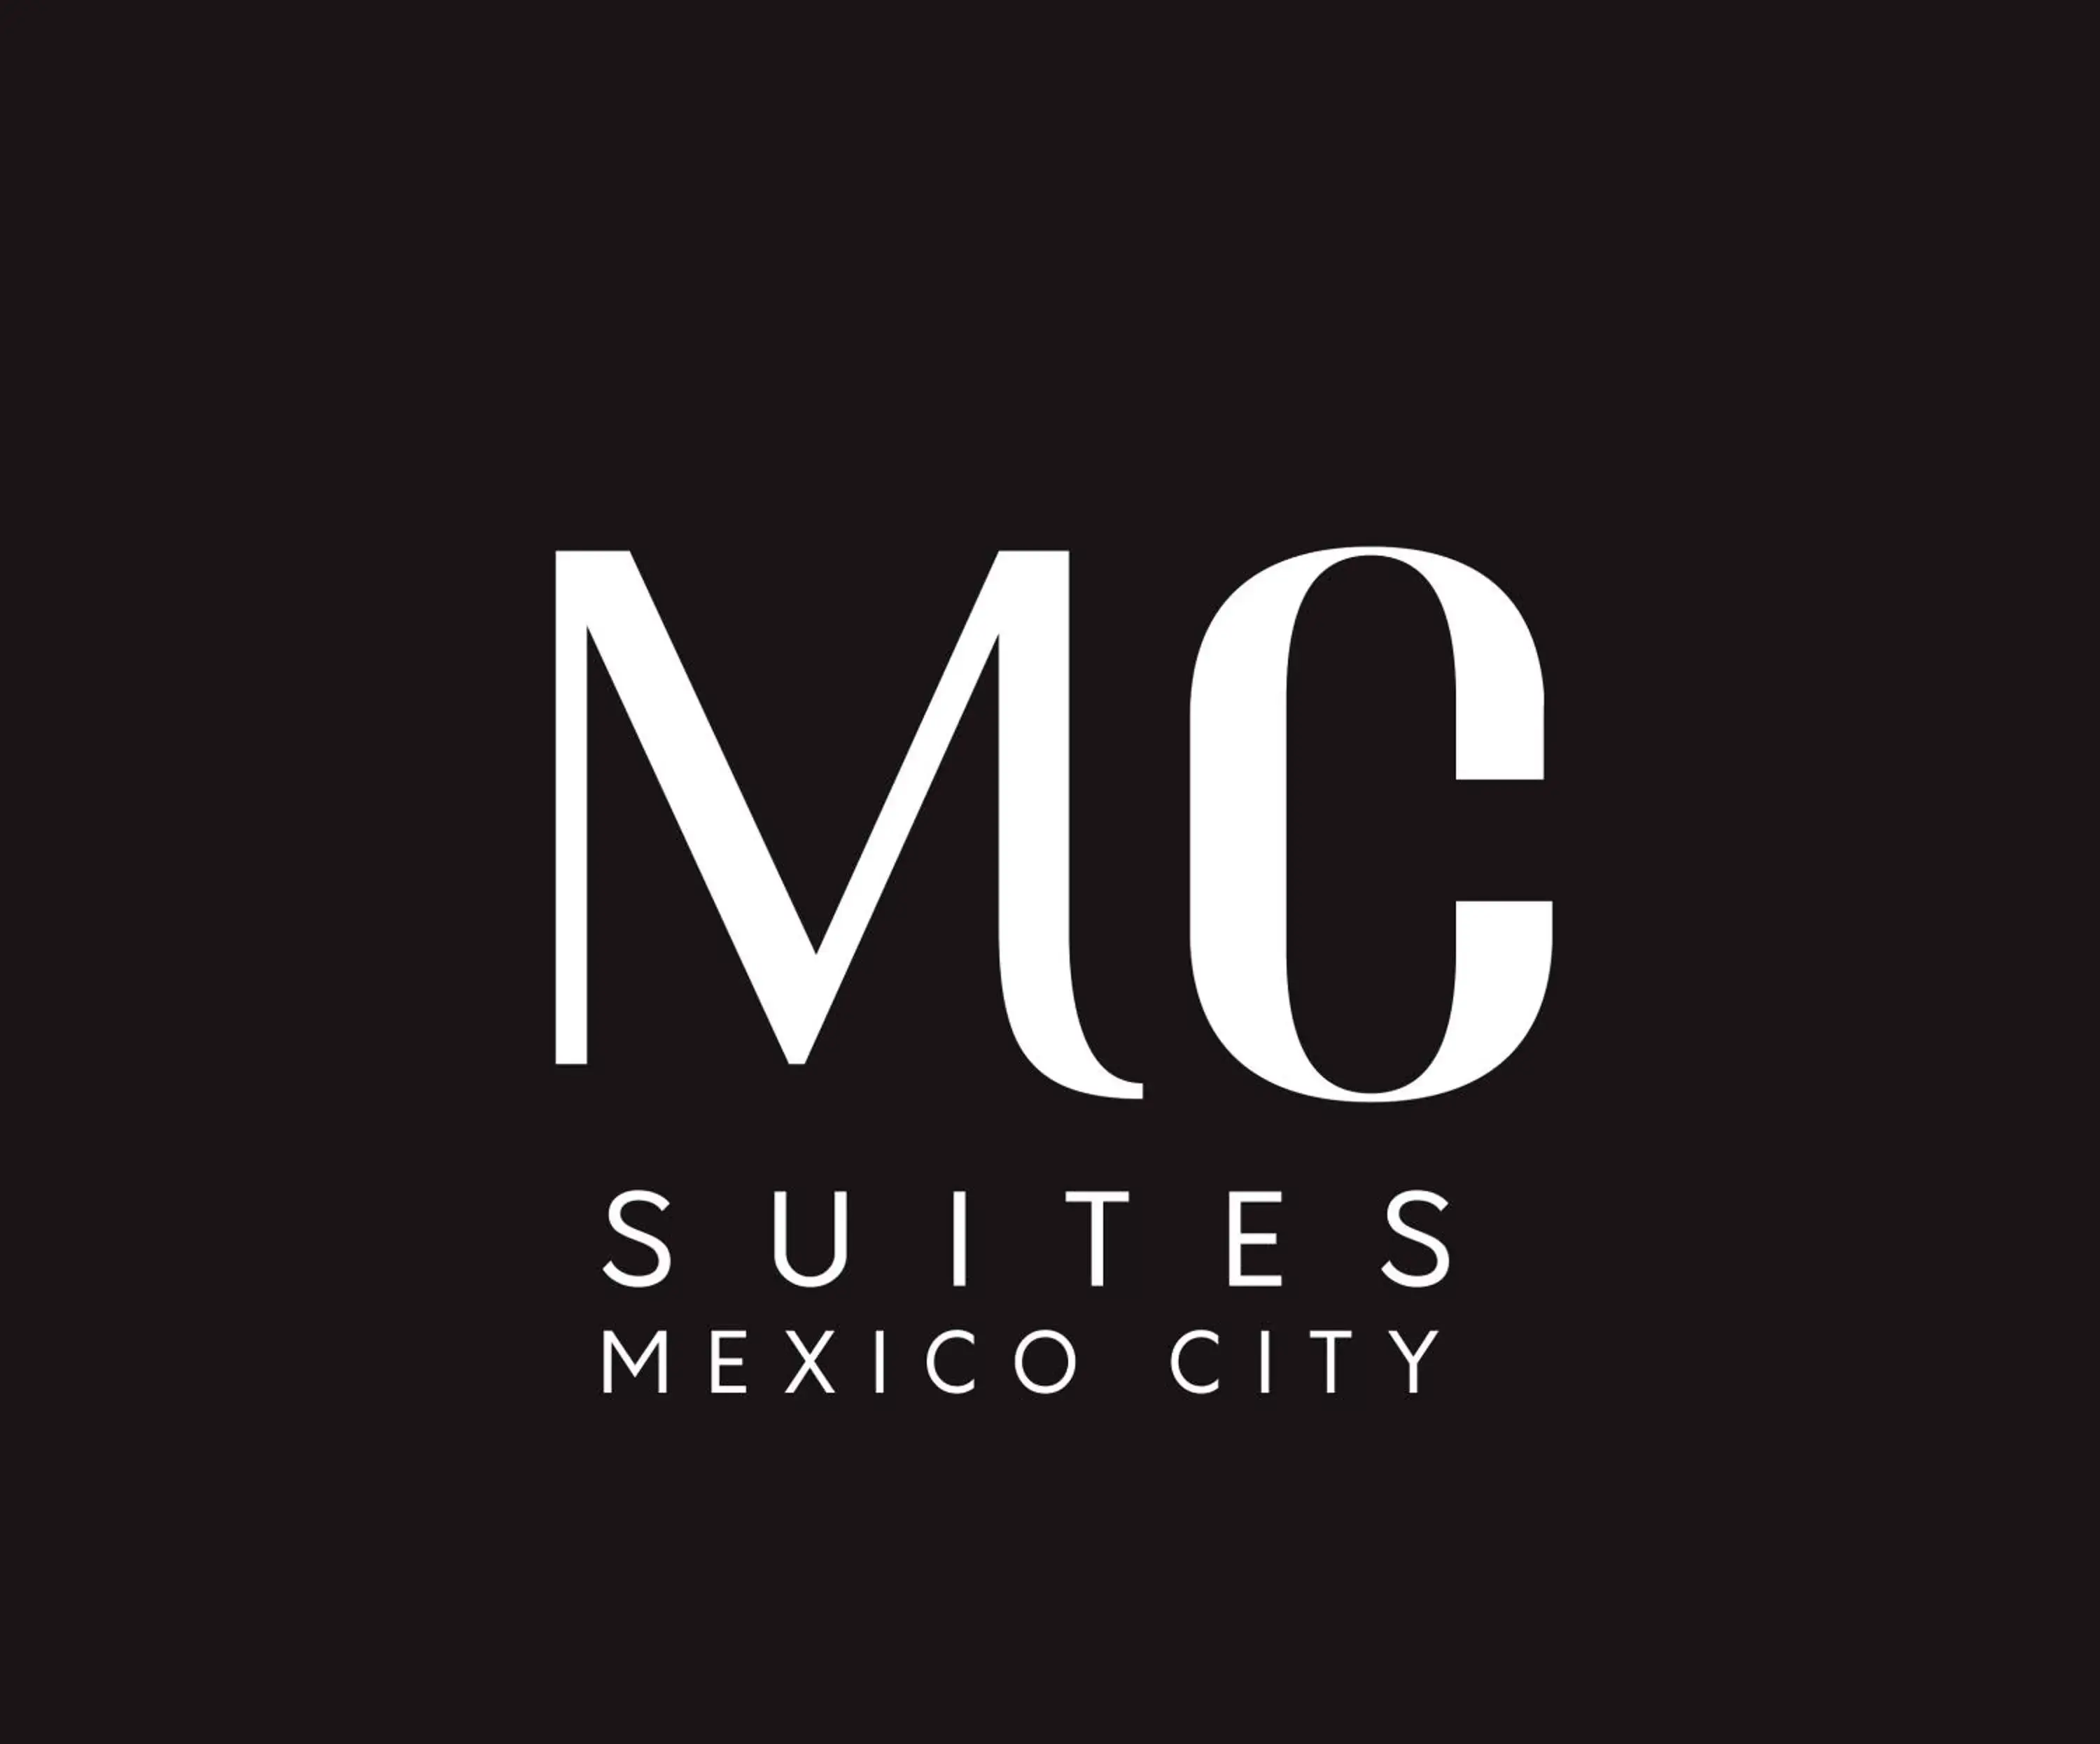 Property logo or sign in MC Suites Mexico City